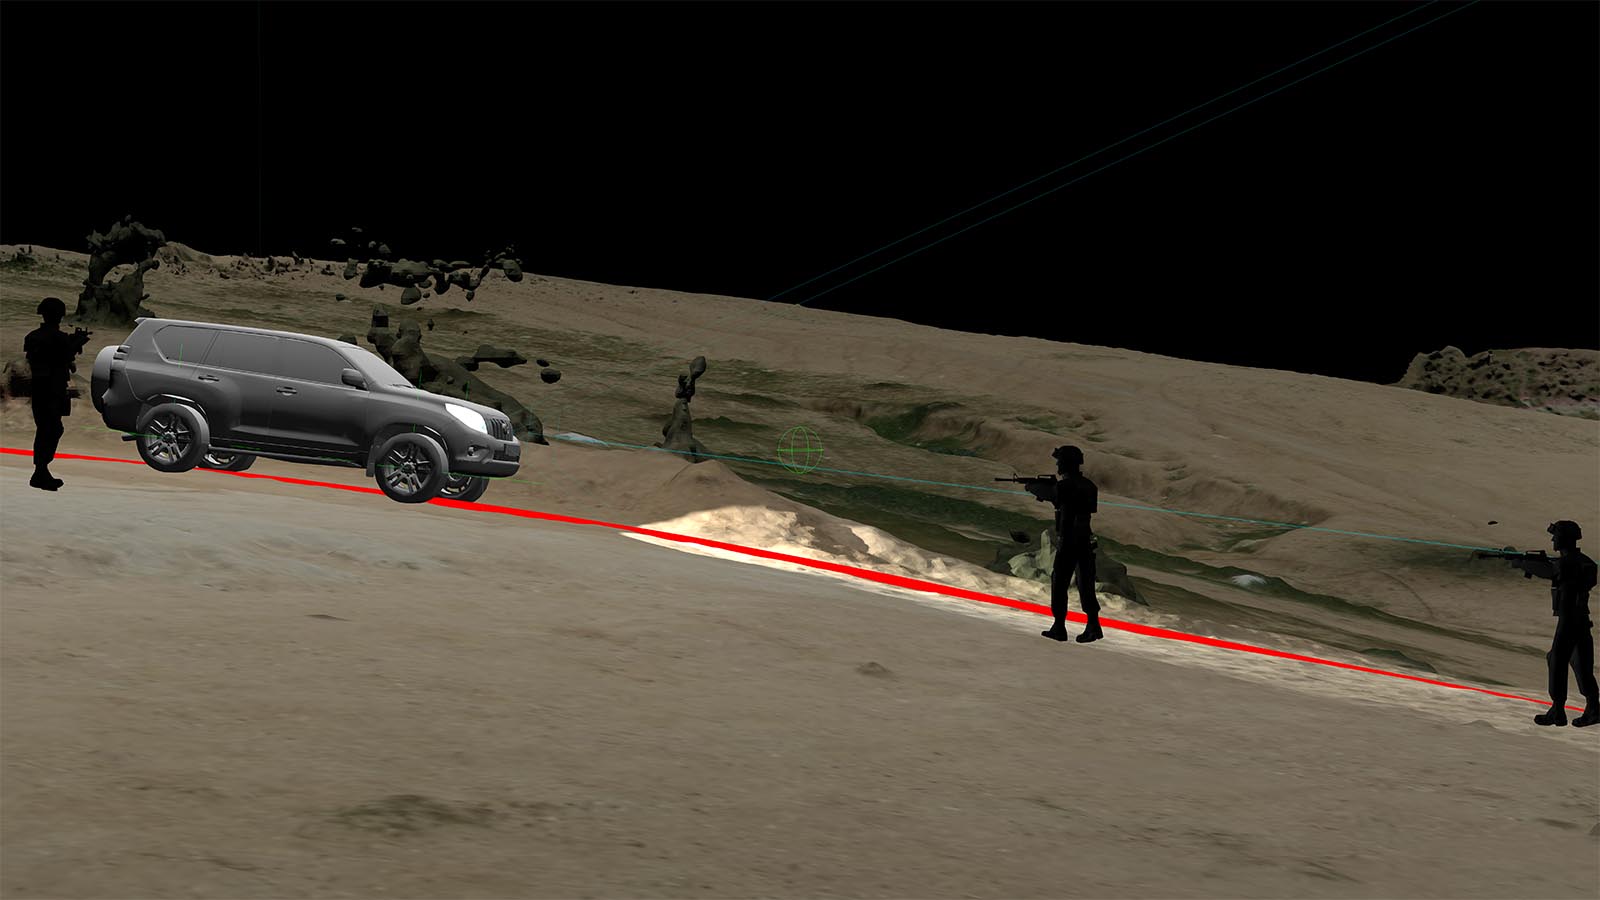 The autopsy of the driver revealed that he had been shot in the leg by the police officer on the far right of this image, which probably caused him to release the brake pedal. A model of the car’s trajectory under such a situation showed that this would have caused the car to accelerate downhill and cast doubt on the likelihood that the driver had accelerated deliberately. Image credit - Forensic Architecture